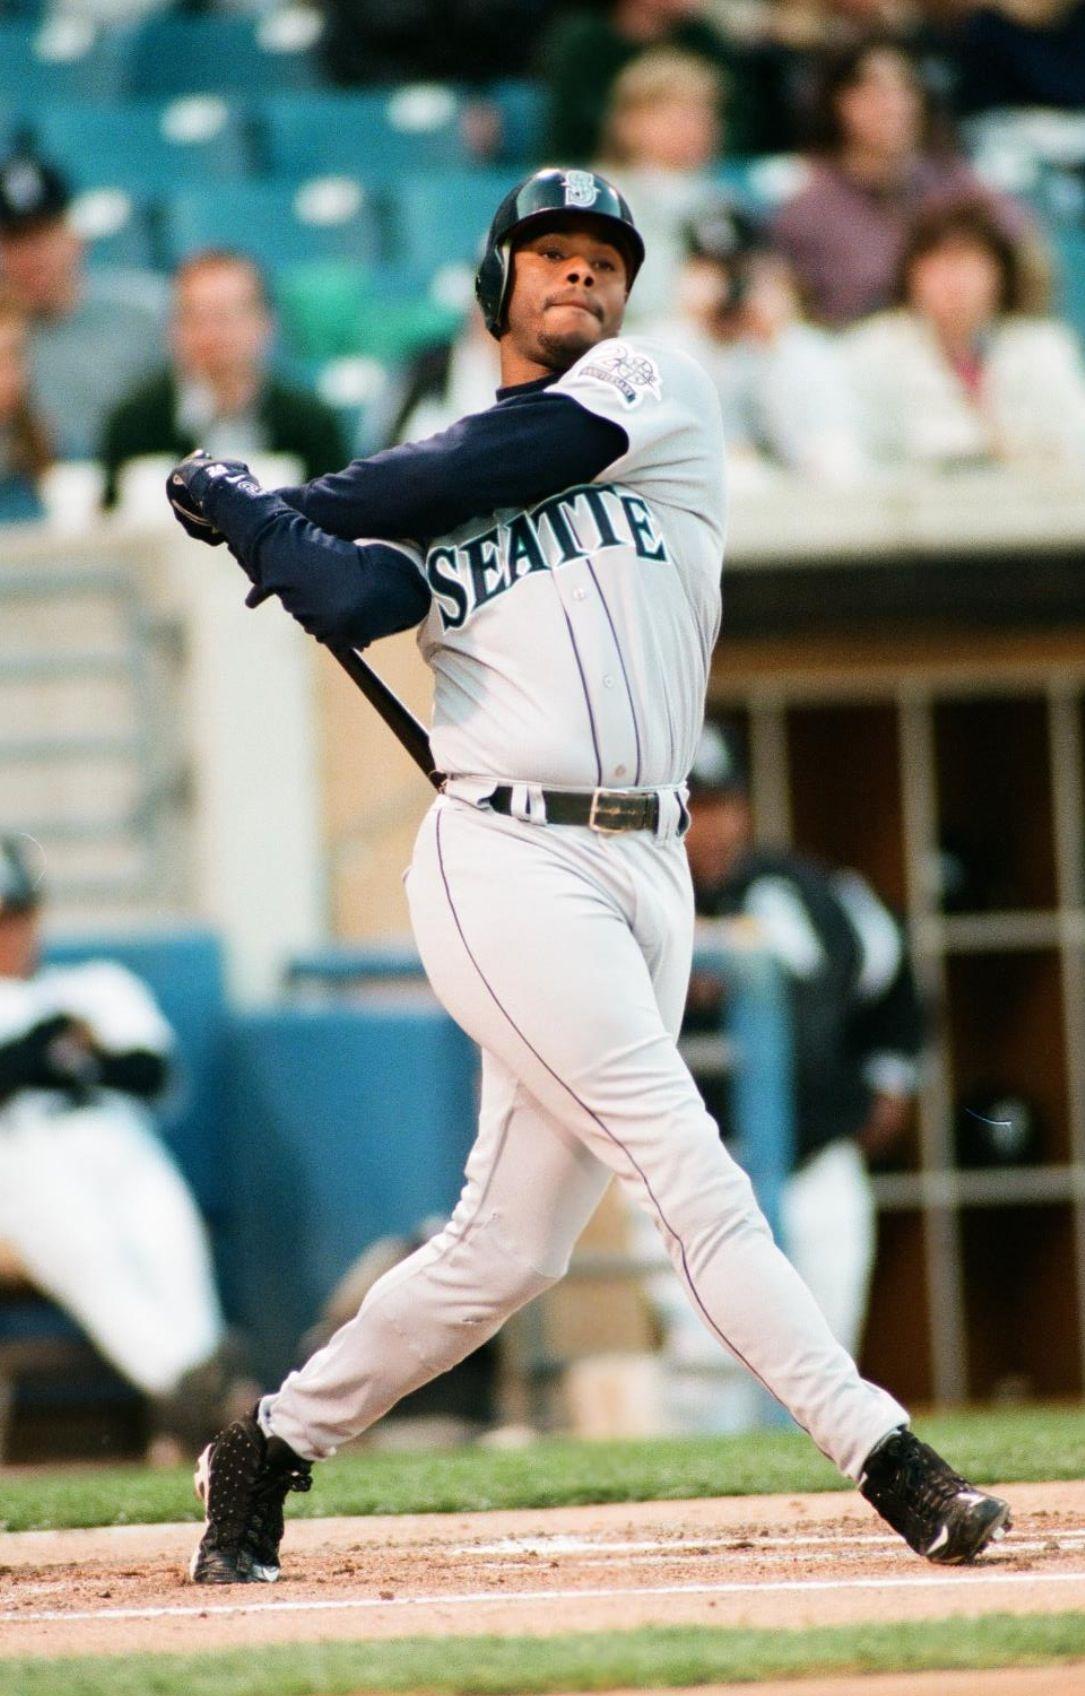 Ken Griffey Jr. was my favorite player growing up. I still think he